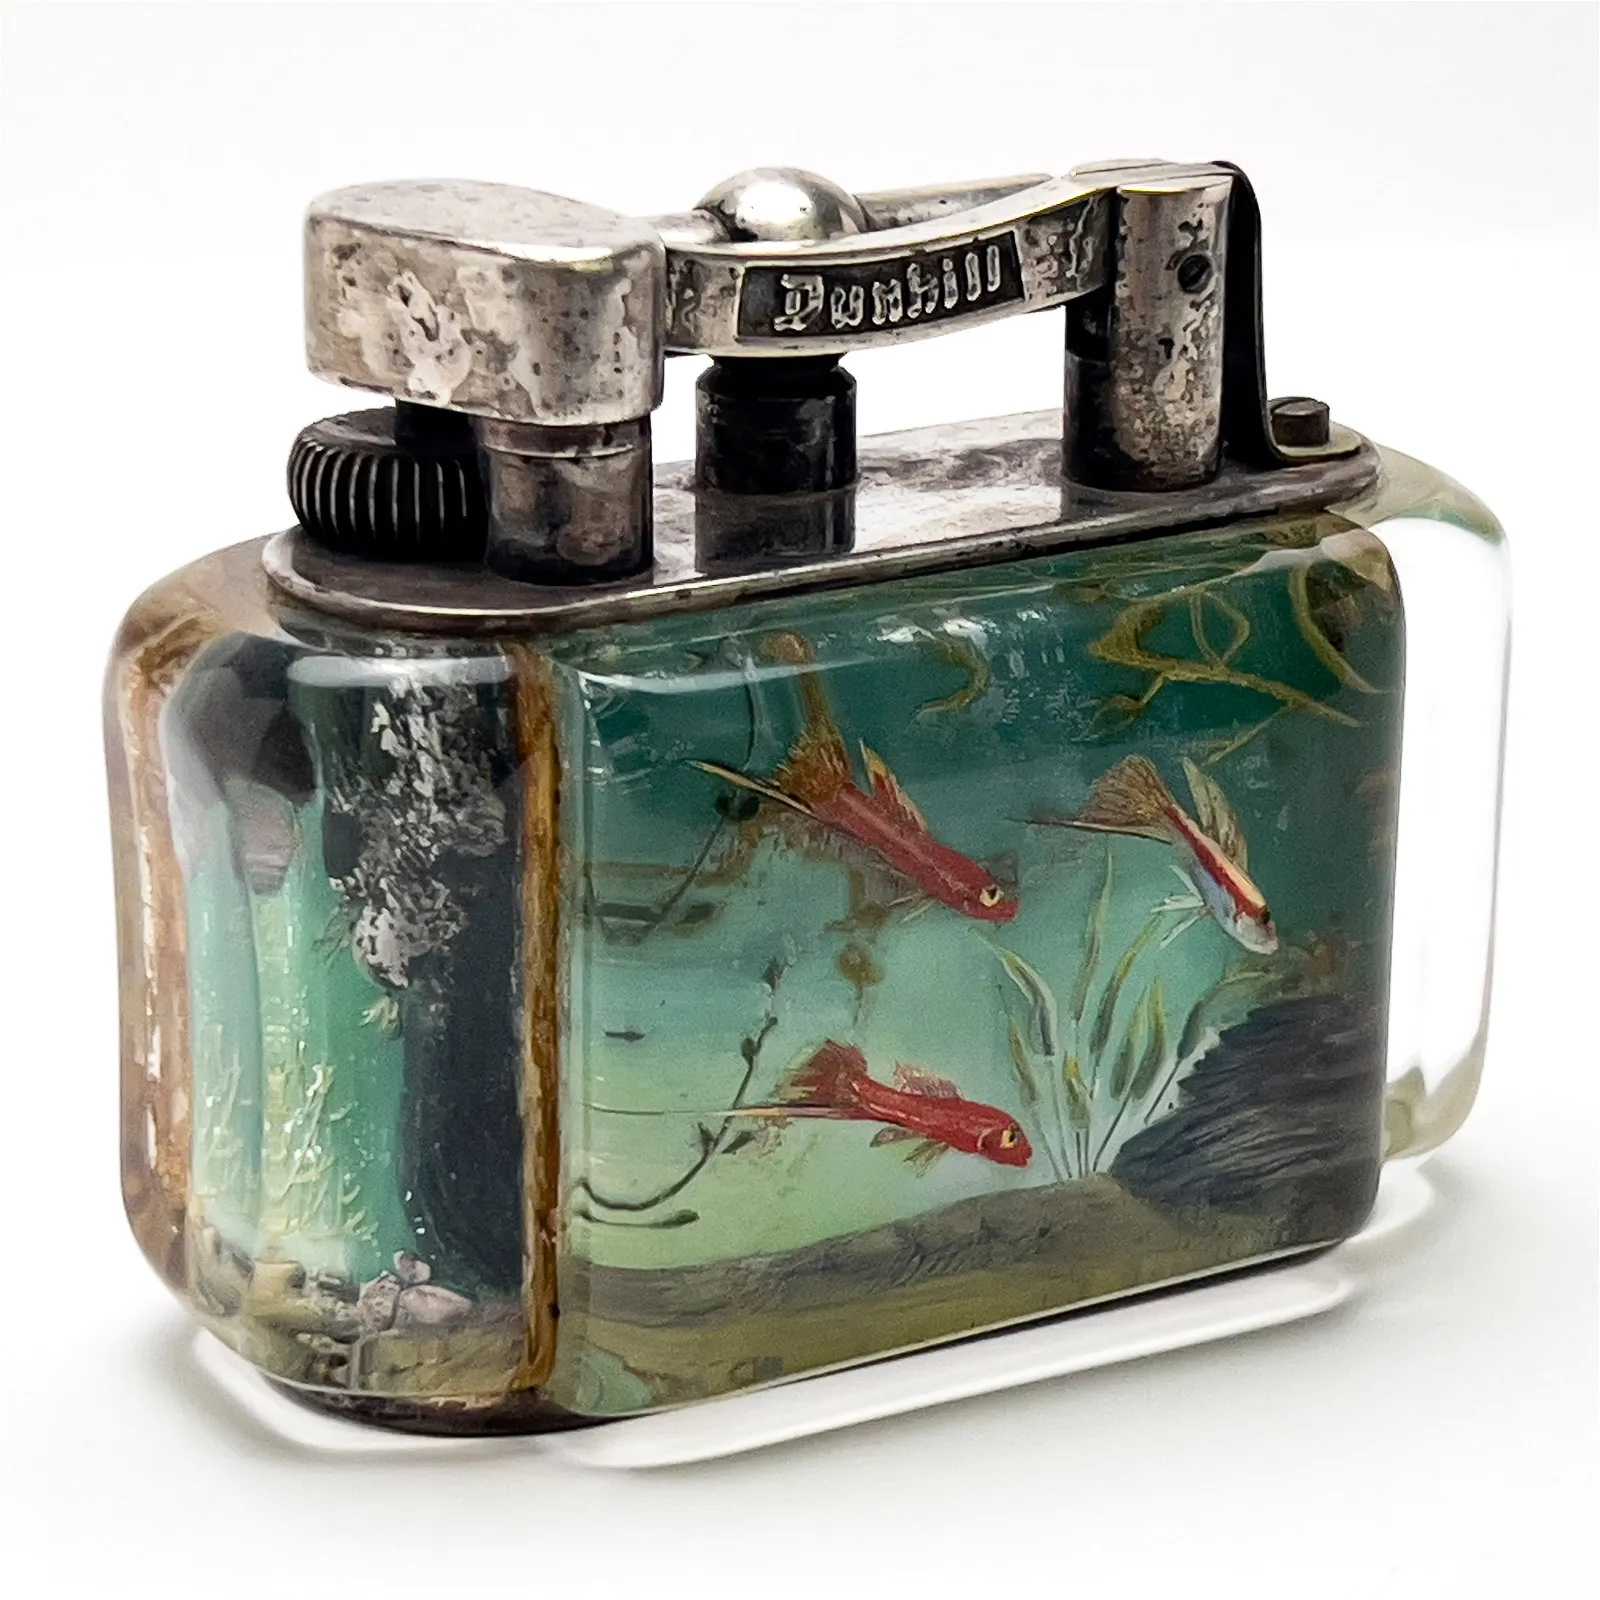 Alfred Dunhill ‘aquarium’ lighter mini-collection sparks interest at Capsule May 2